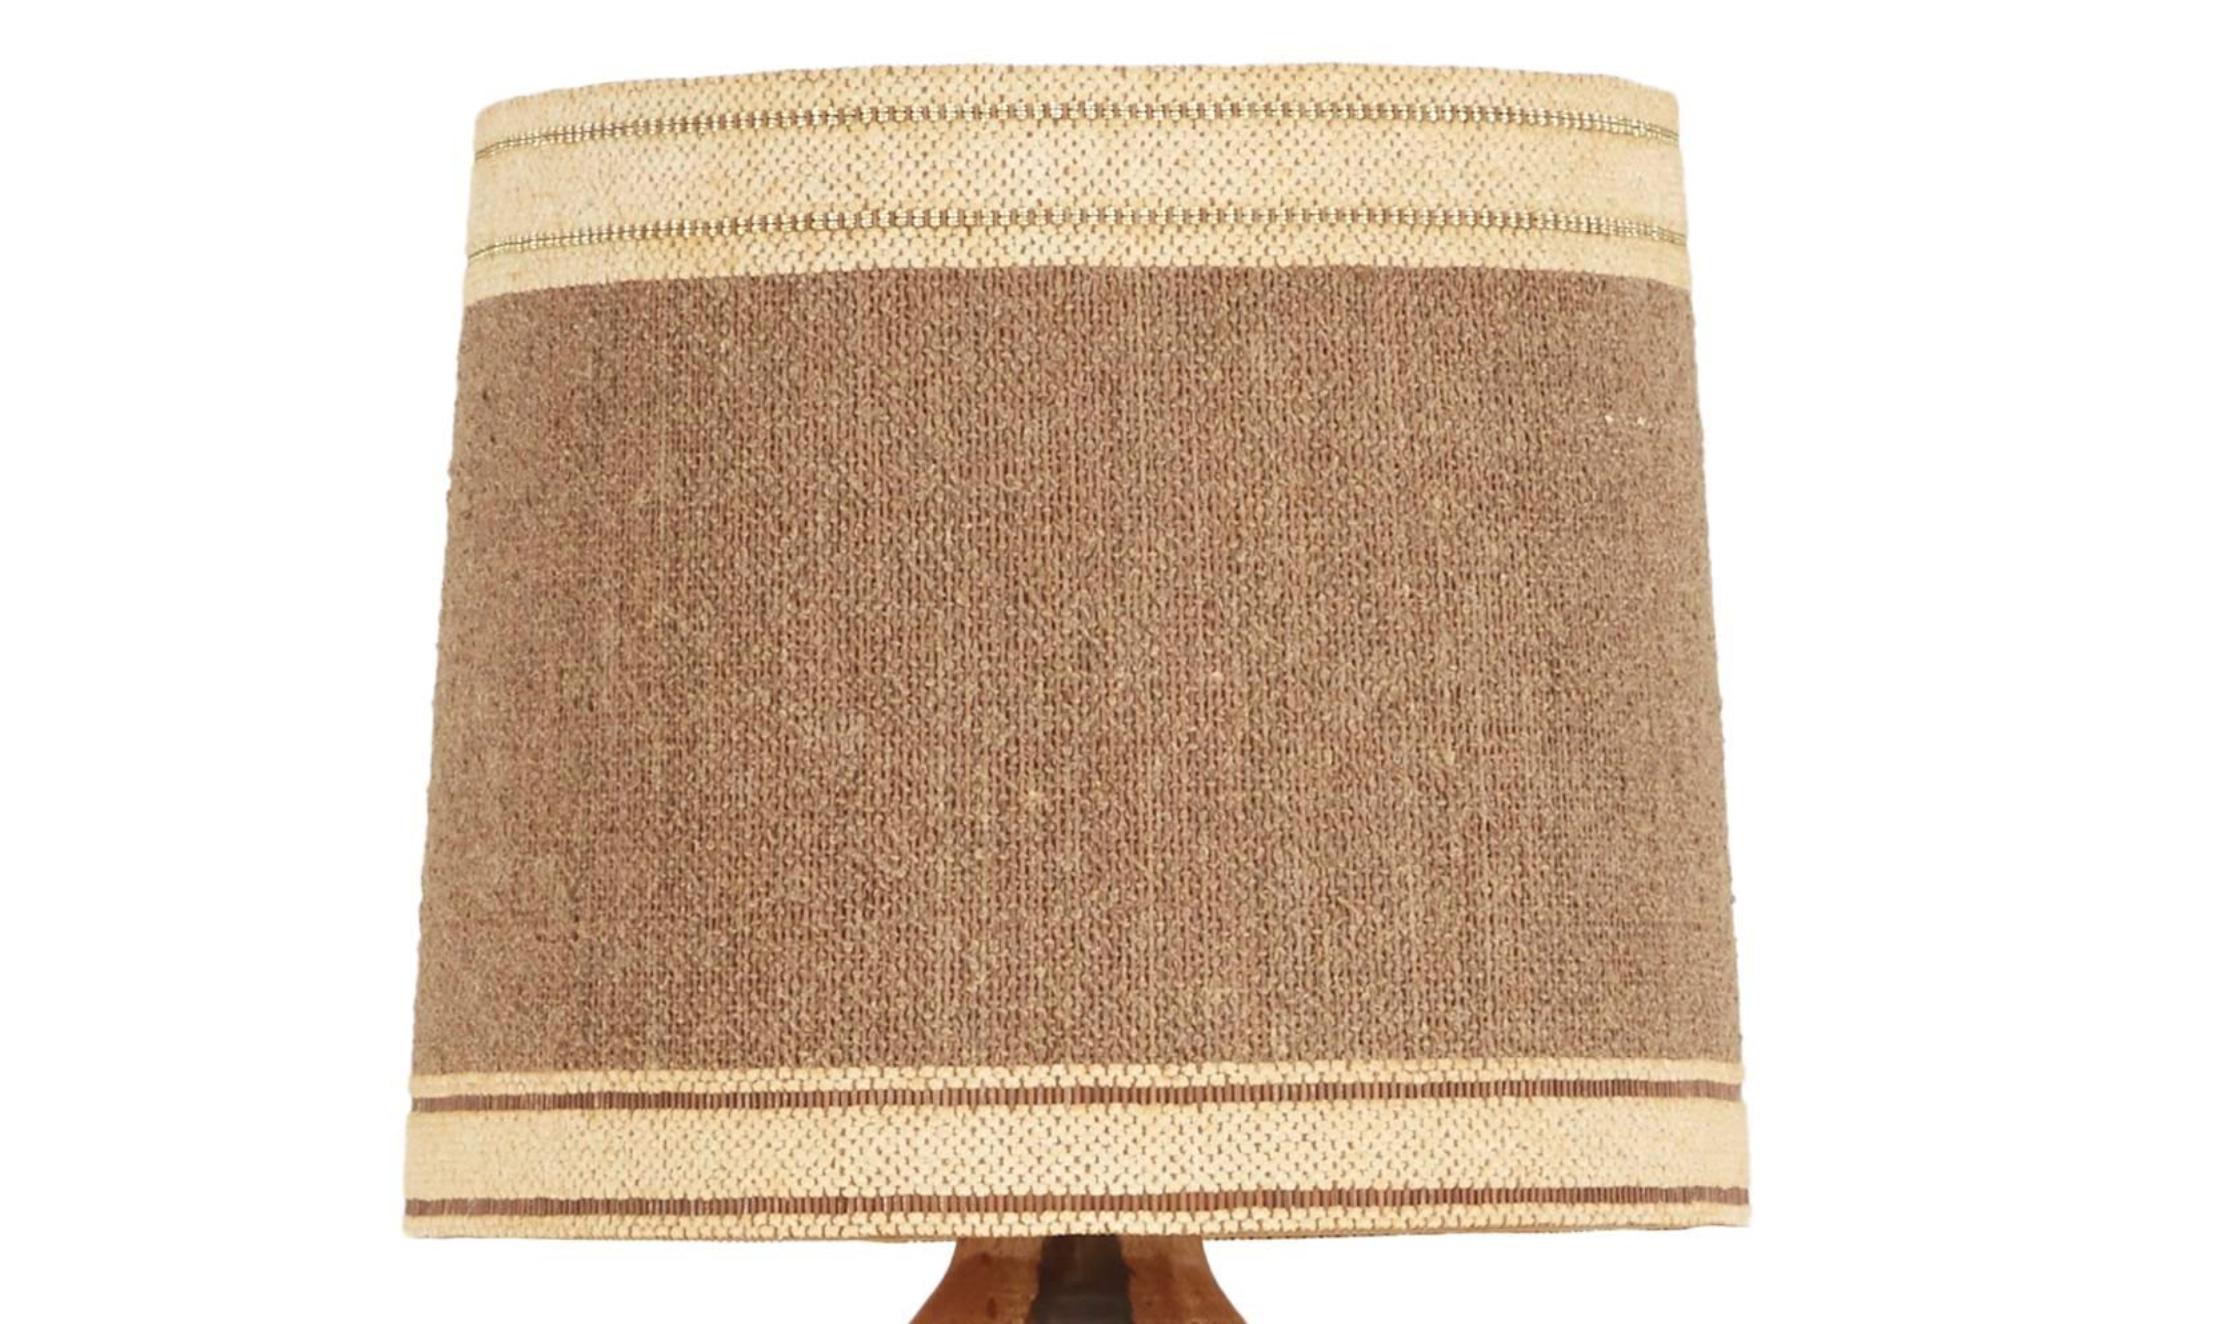 Mid-Century Modern David Cressey Lamp for Architectural Pottery with Maria Kipp Shade, circa 1960s